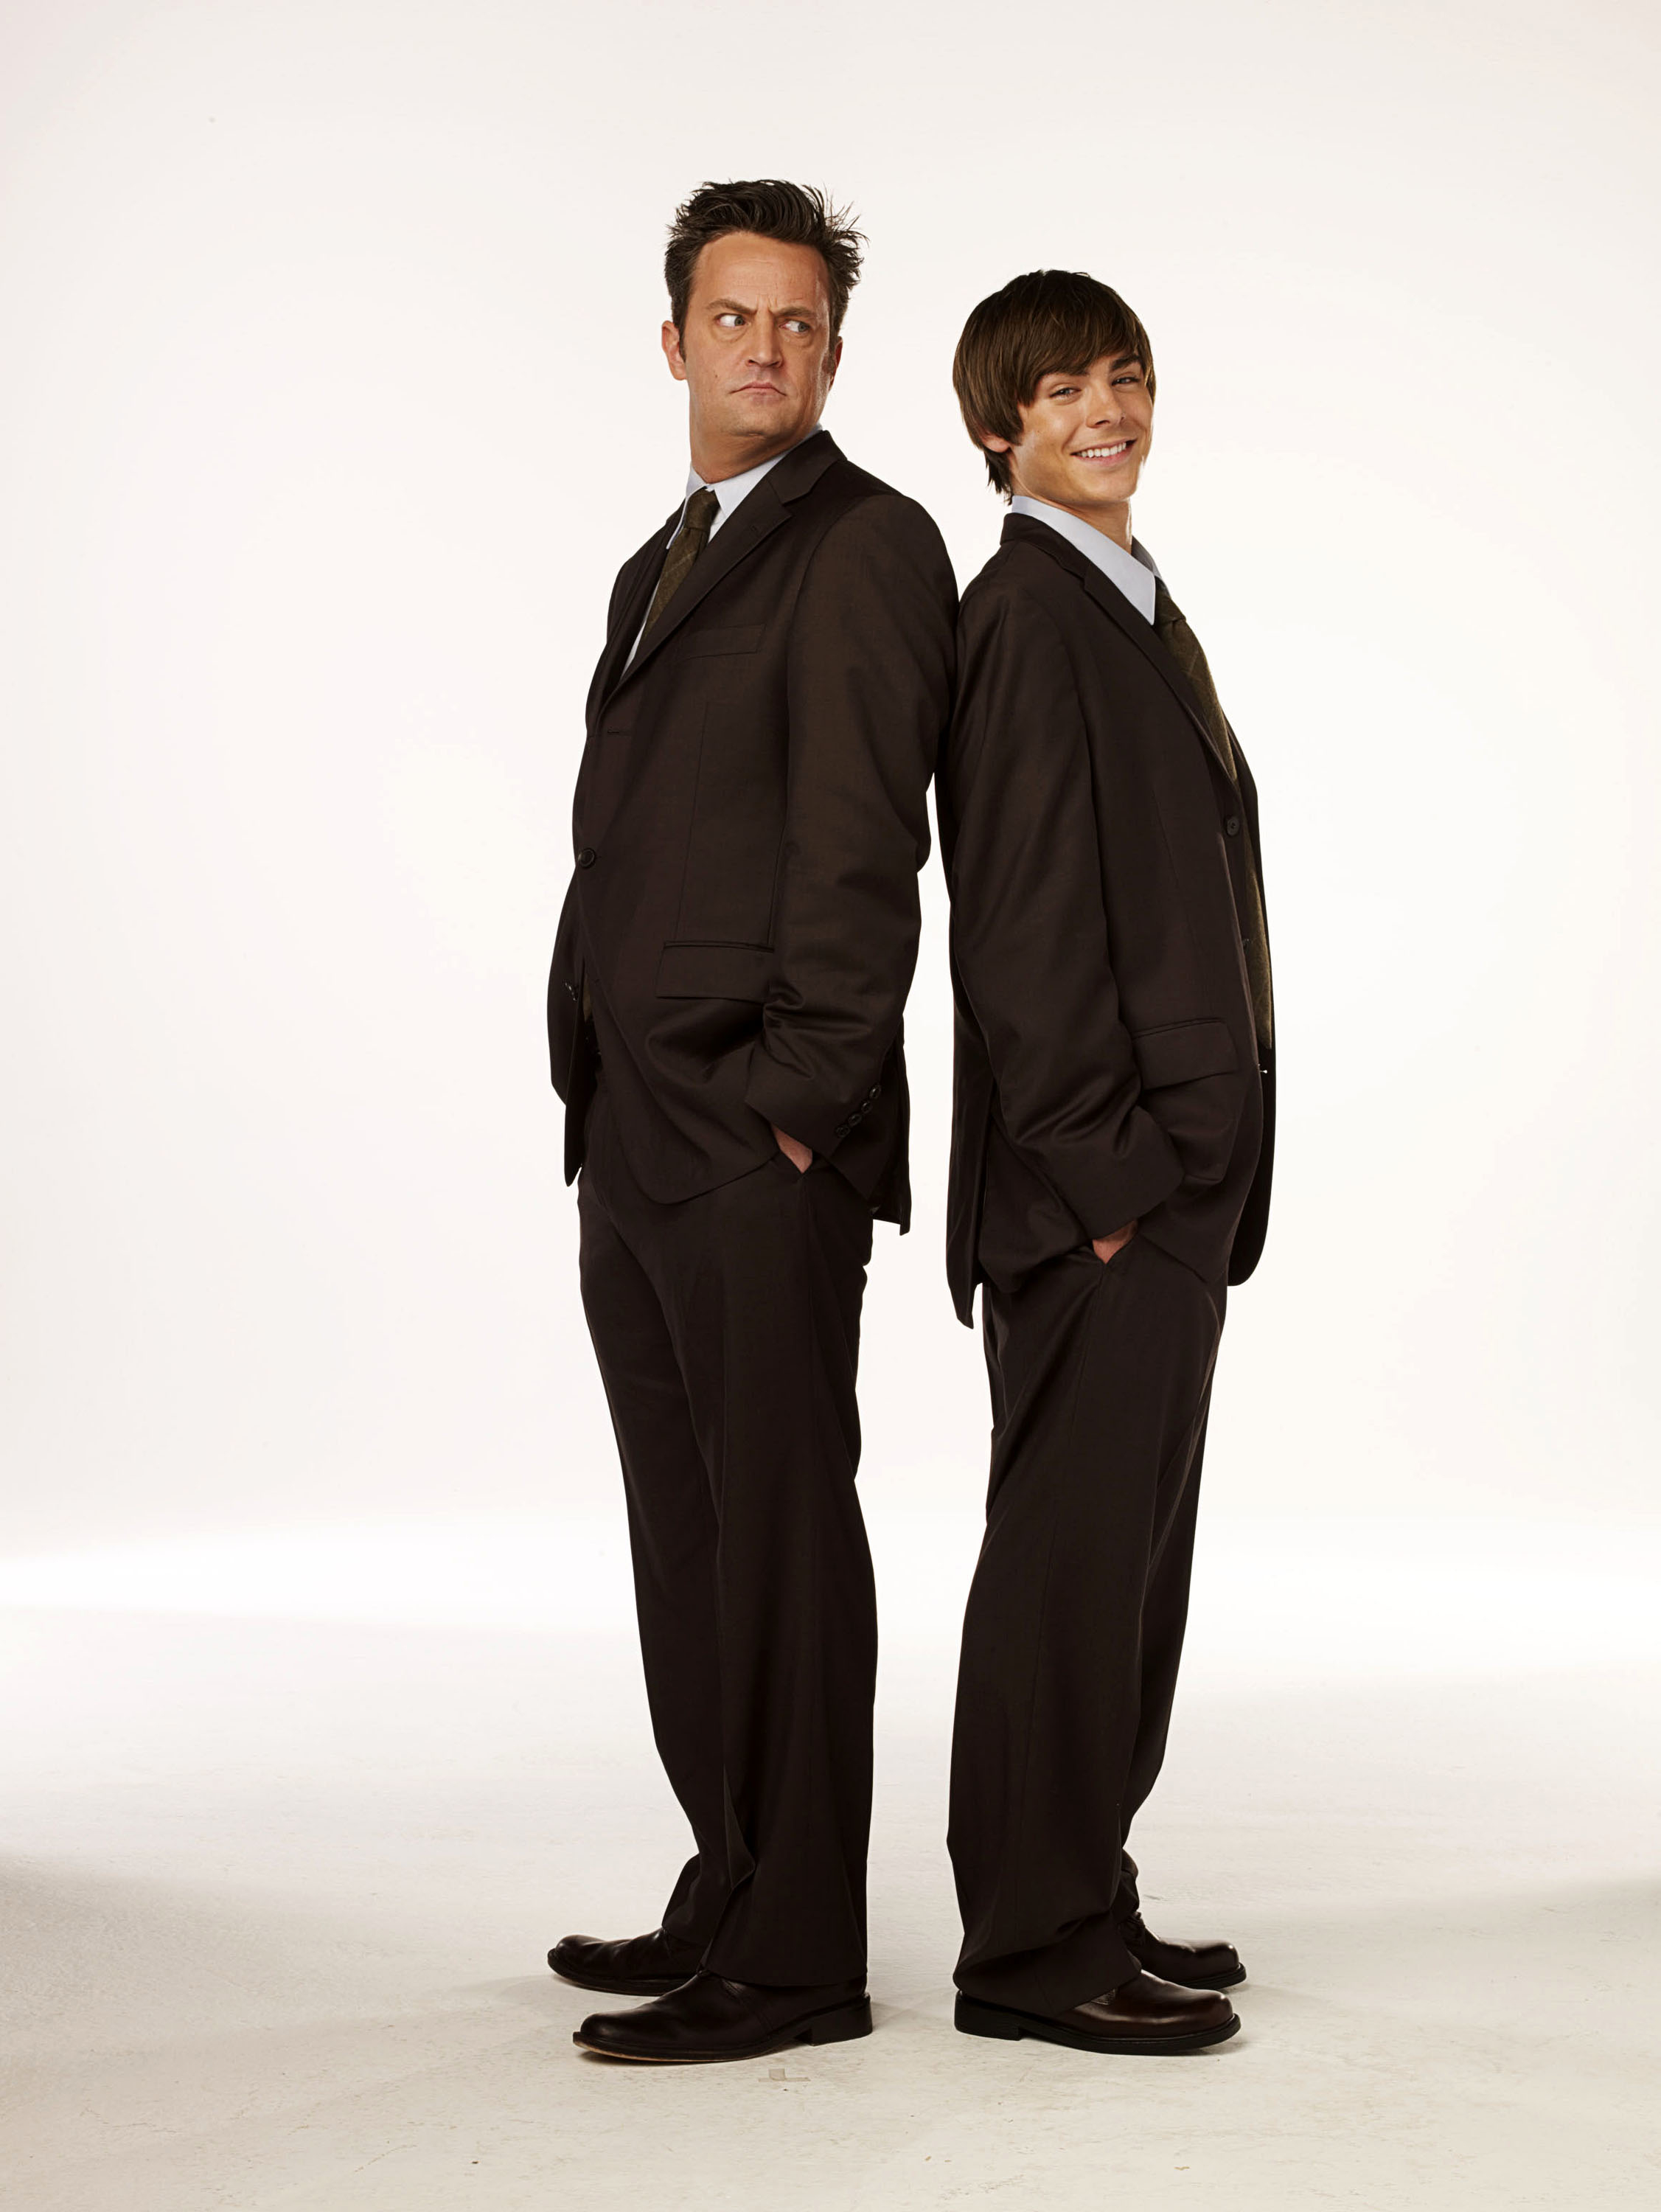 Matthew Perry and Zac Efron in suits